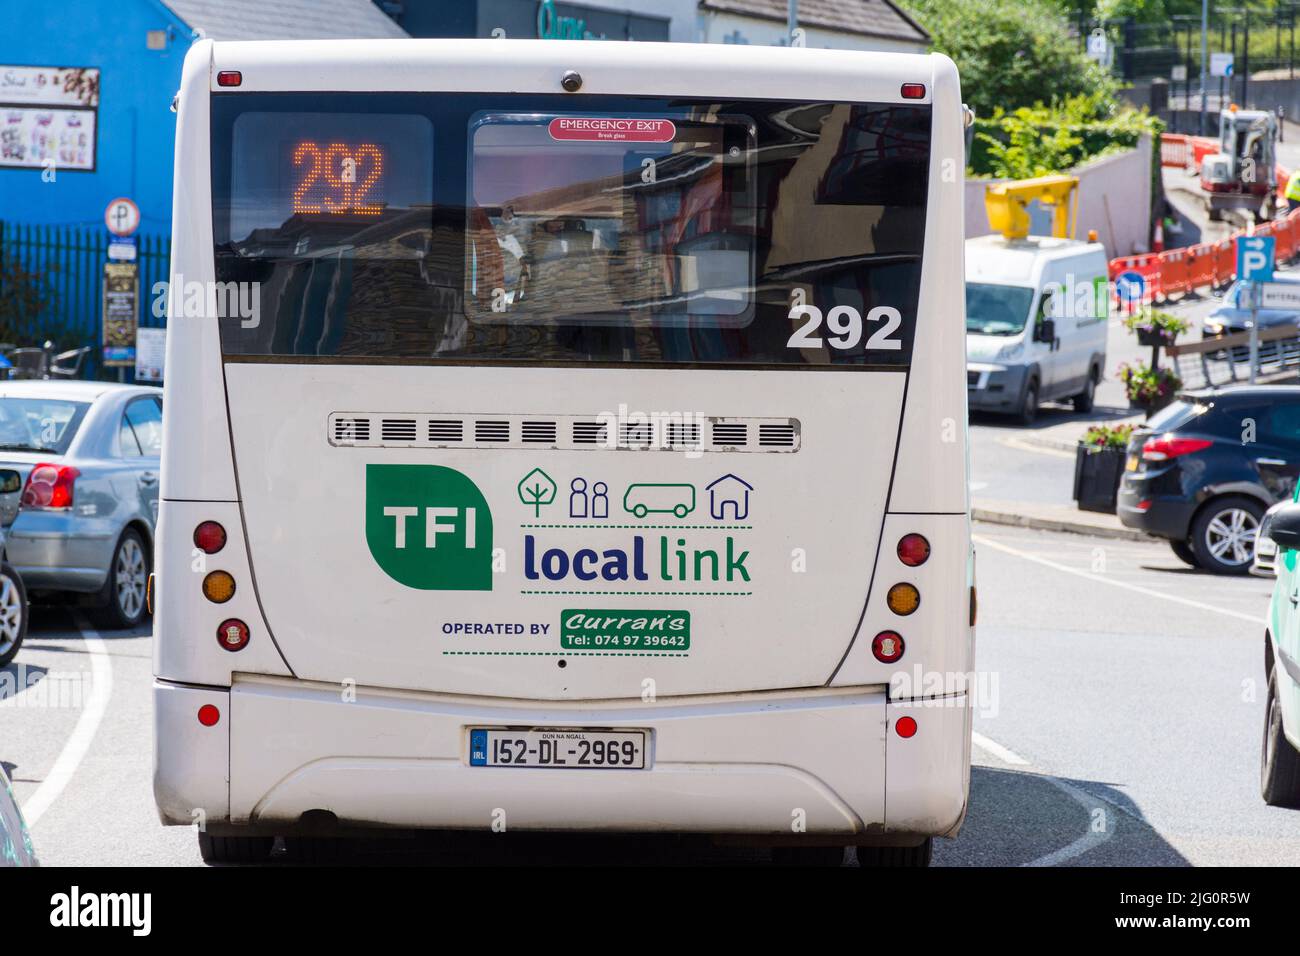 Rural Transport Programme/TFI Local Link bus in Donegal Town, County Donegal, Ireland Stock Photo